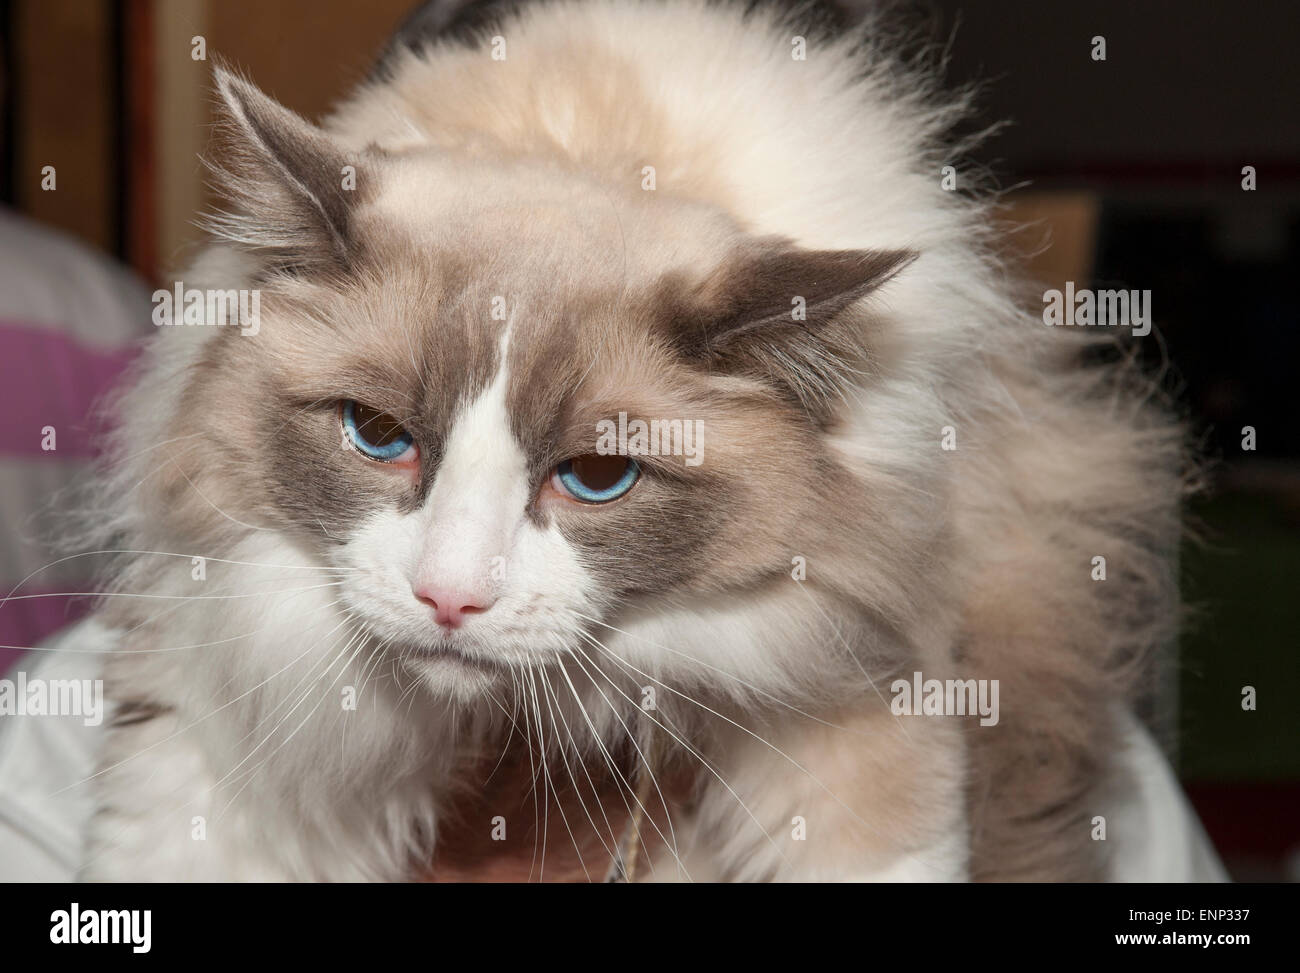 Excel, London, UK. 9th May, 2015. 5th London Pet Show features cats, dogs, jumping rabbits, reptiles, fish, horses and donkeys, running from 9th till 10th May. A Bicolour Ragdoll cat. Credit:  Malcolm Park editorial/Alamy Live News Stock Photo